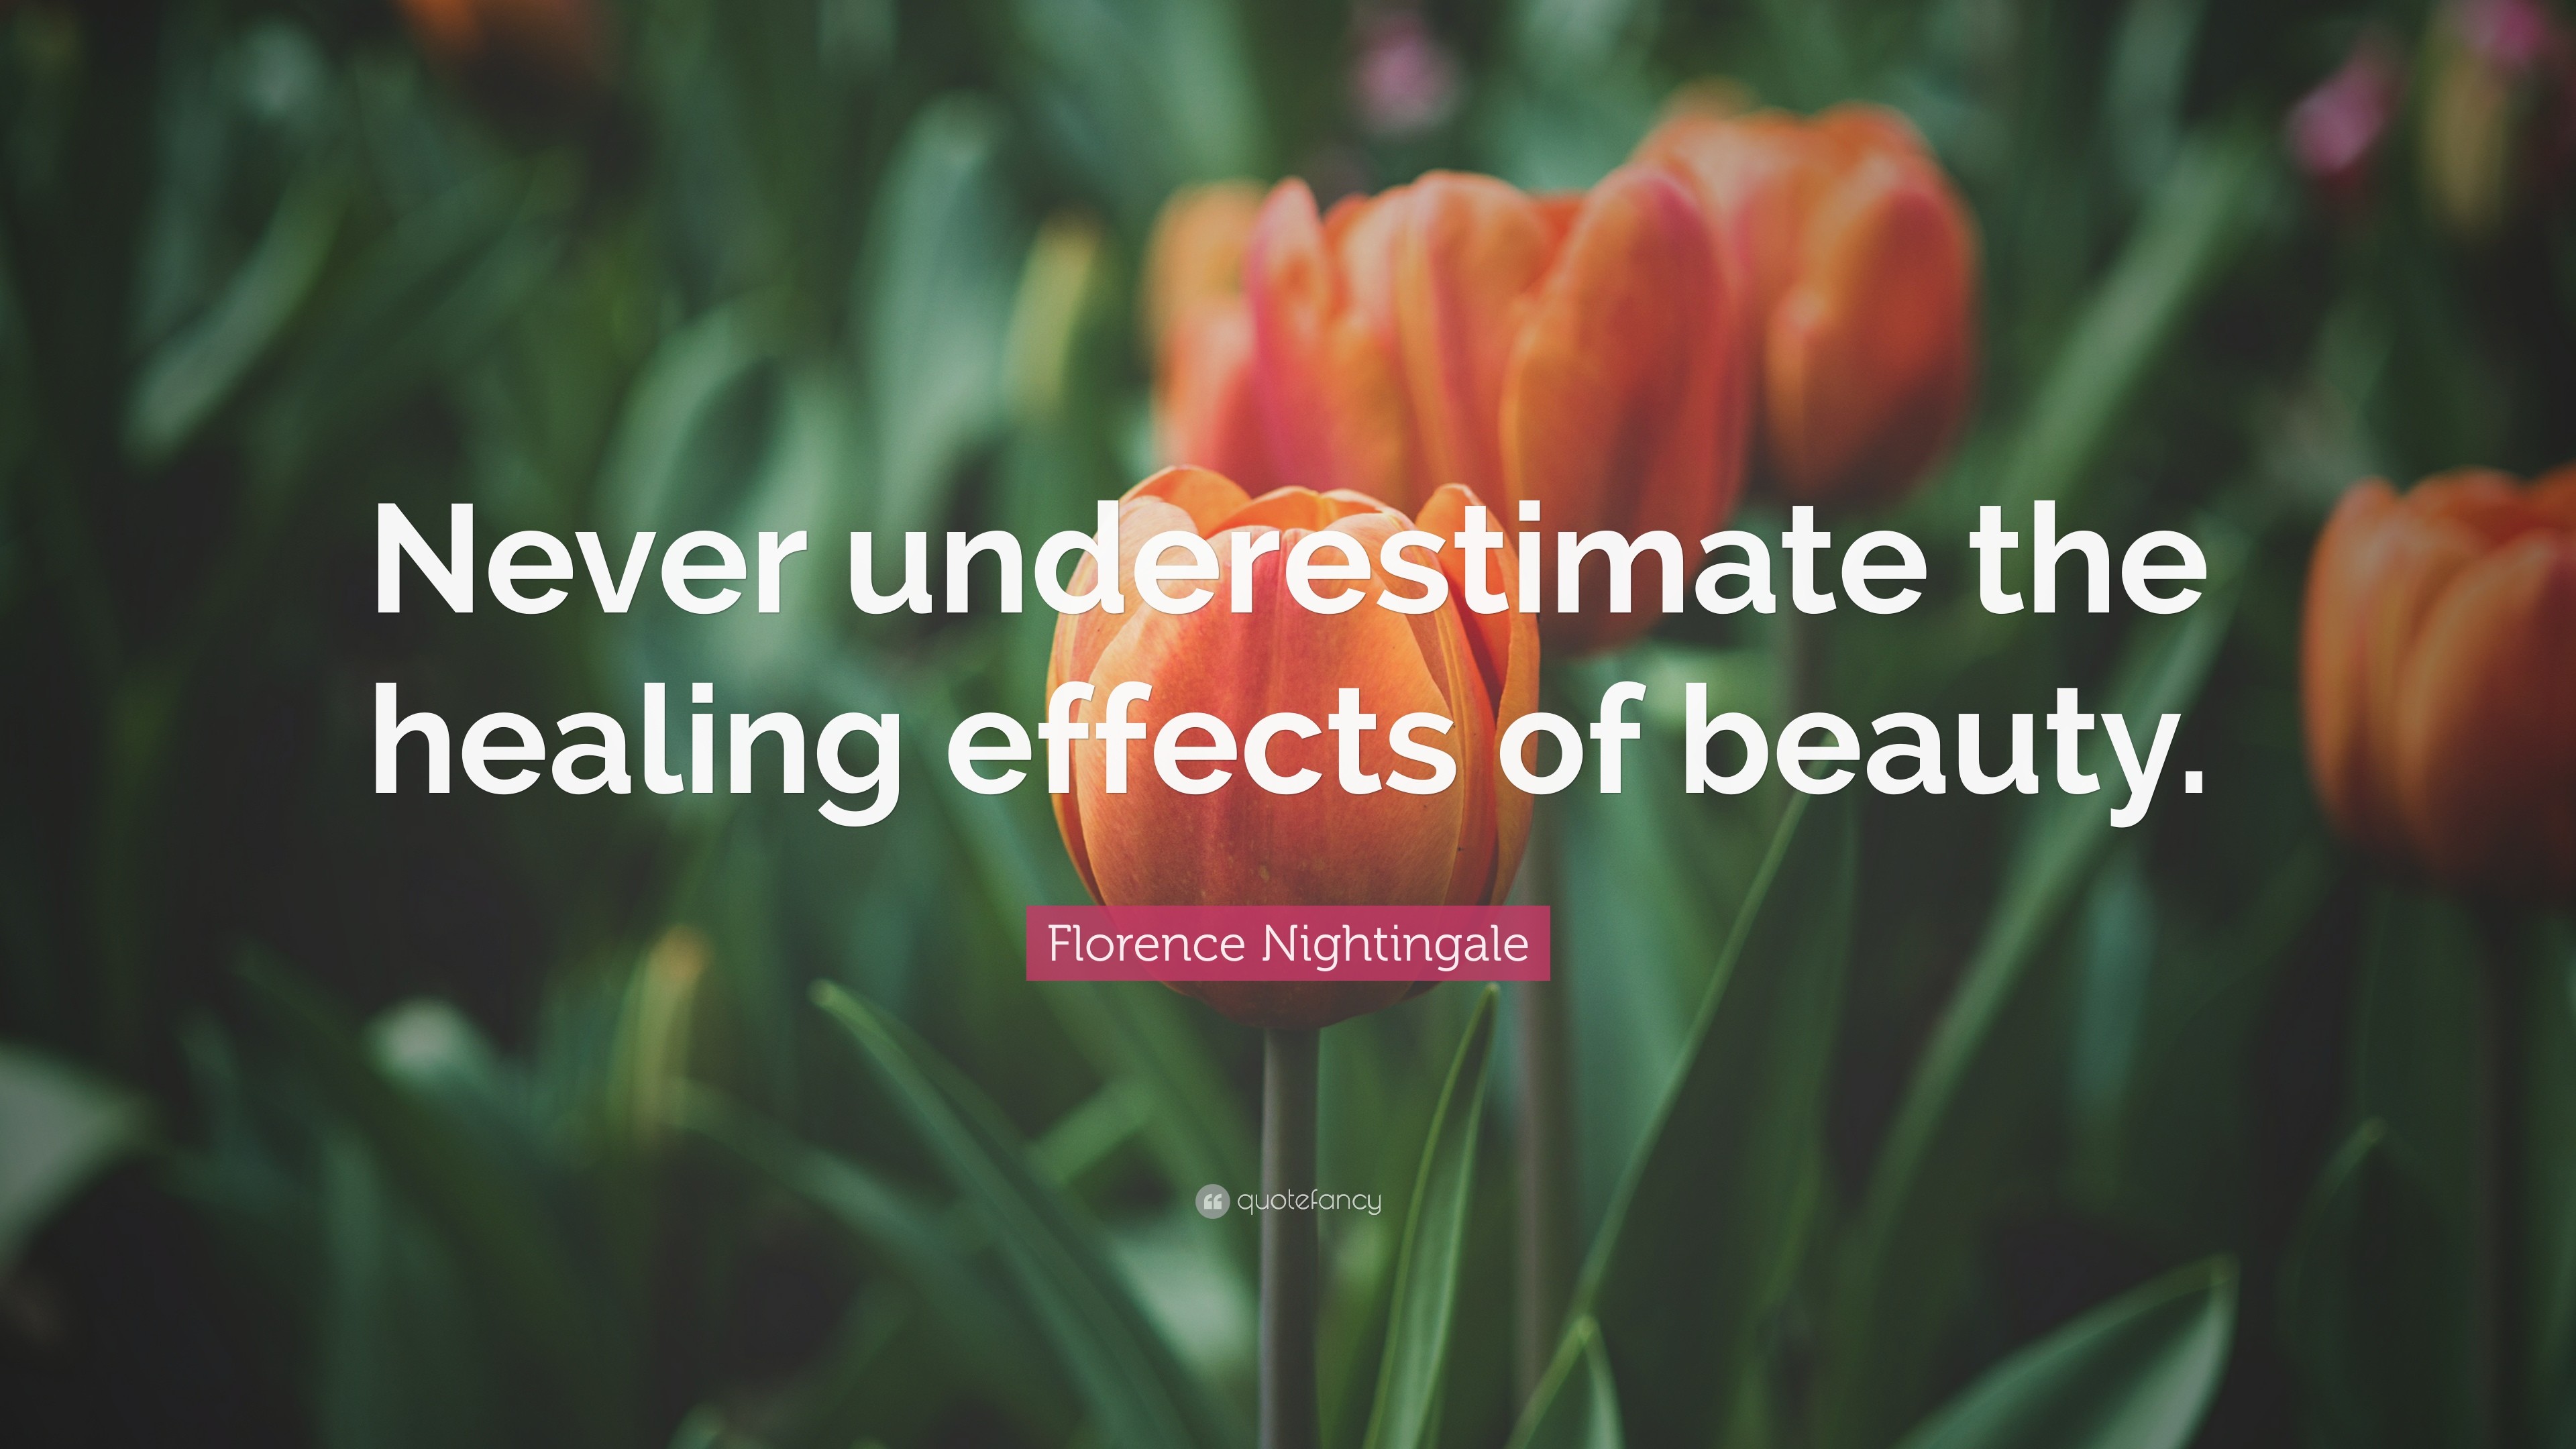 3840x2160 Florence Nightingale Quote: “Never underestimate the healing effects of  beauty.”